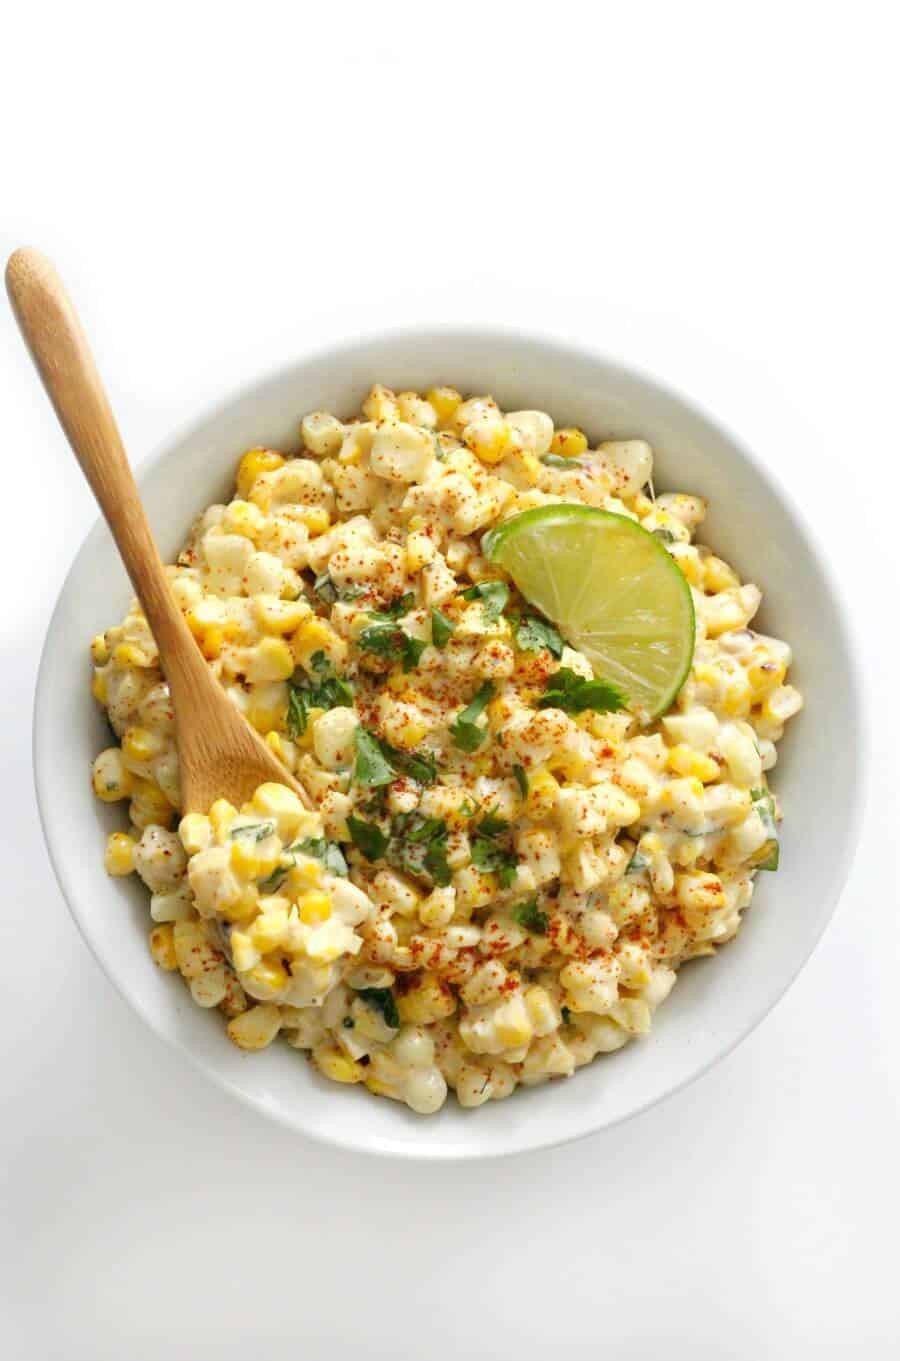 grilled vegan mexican street corn salad with wooden spoon.
